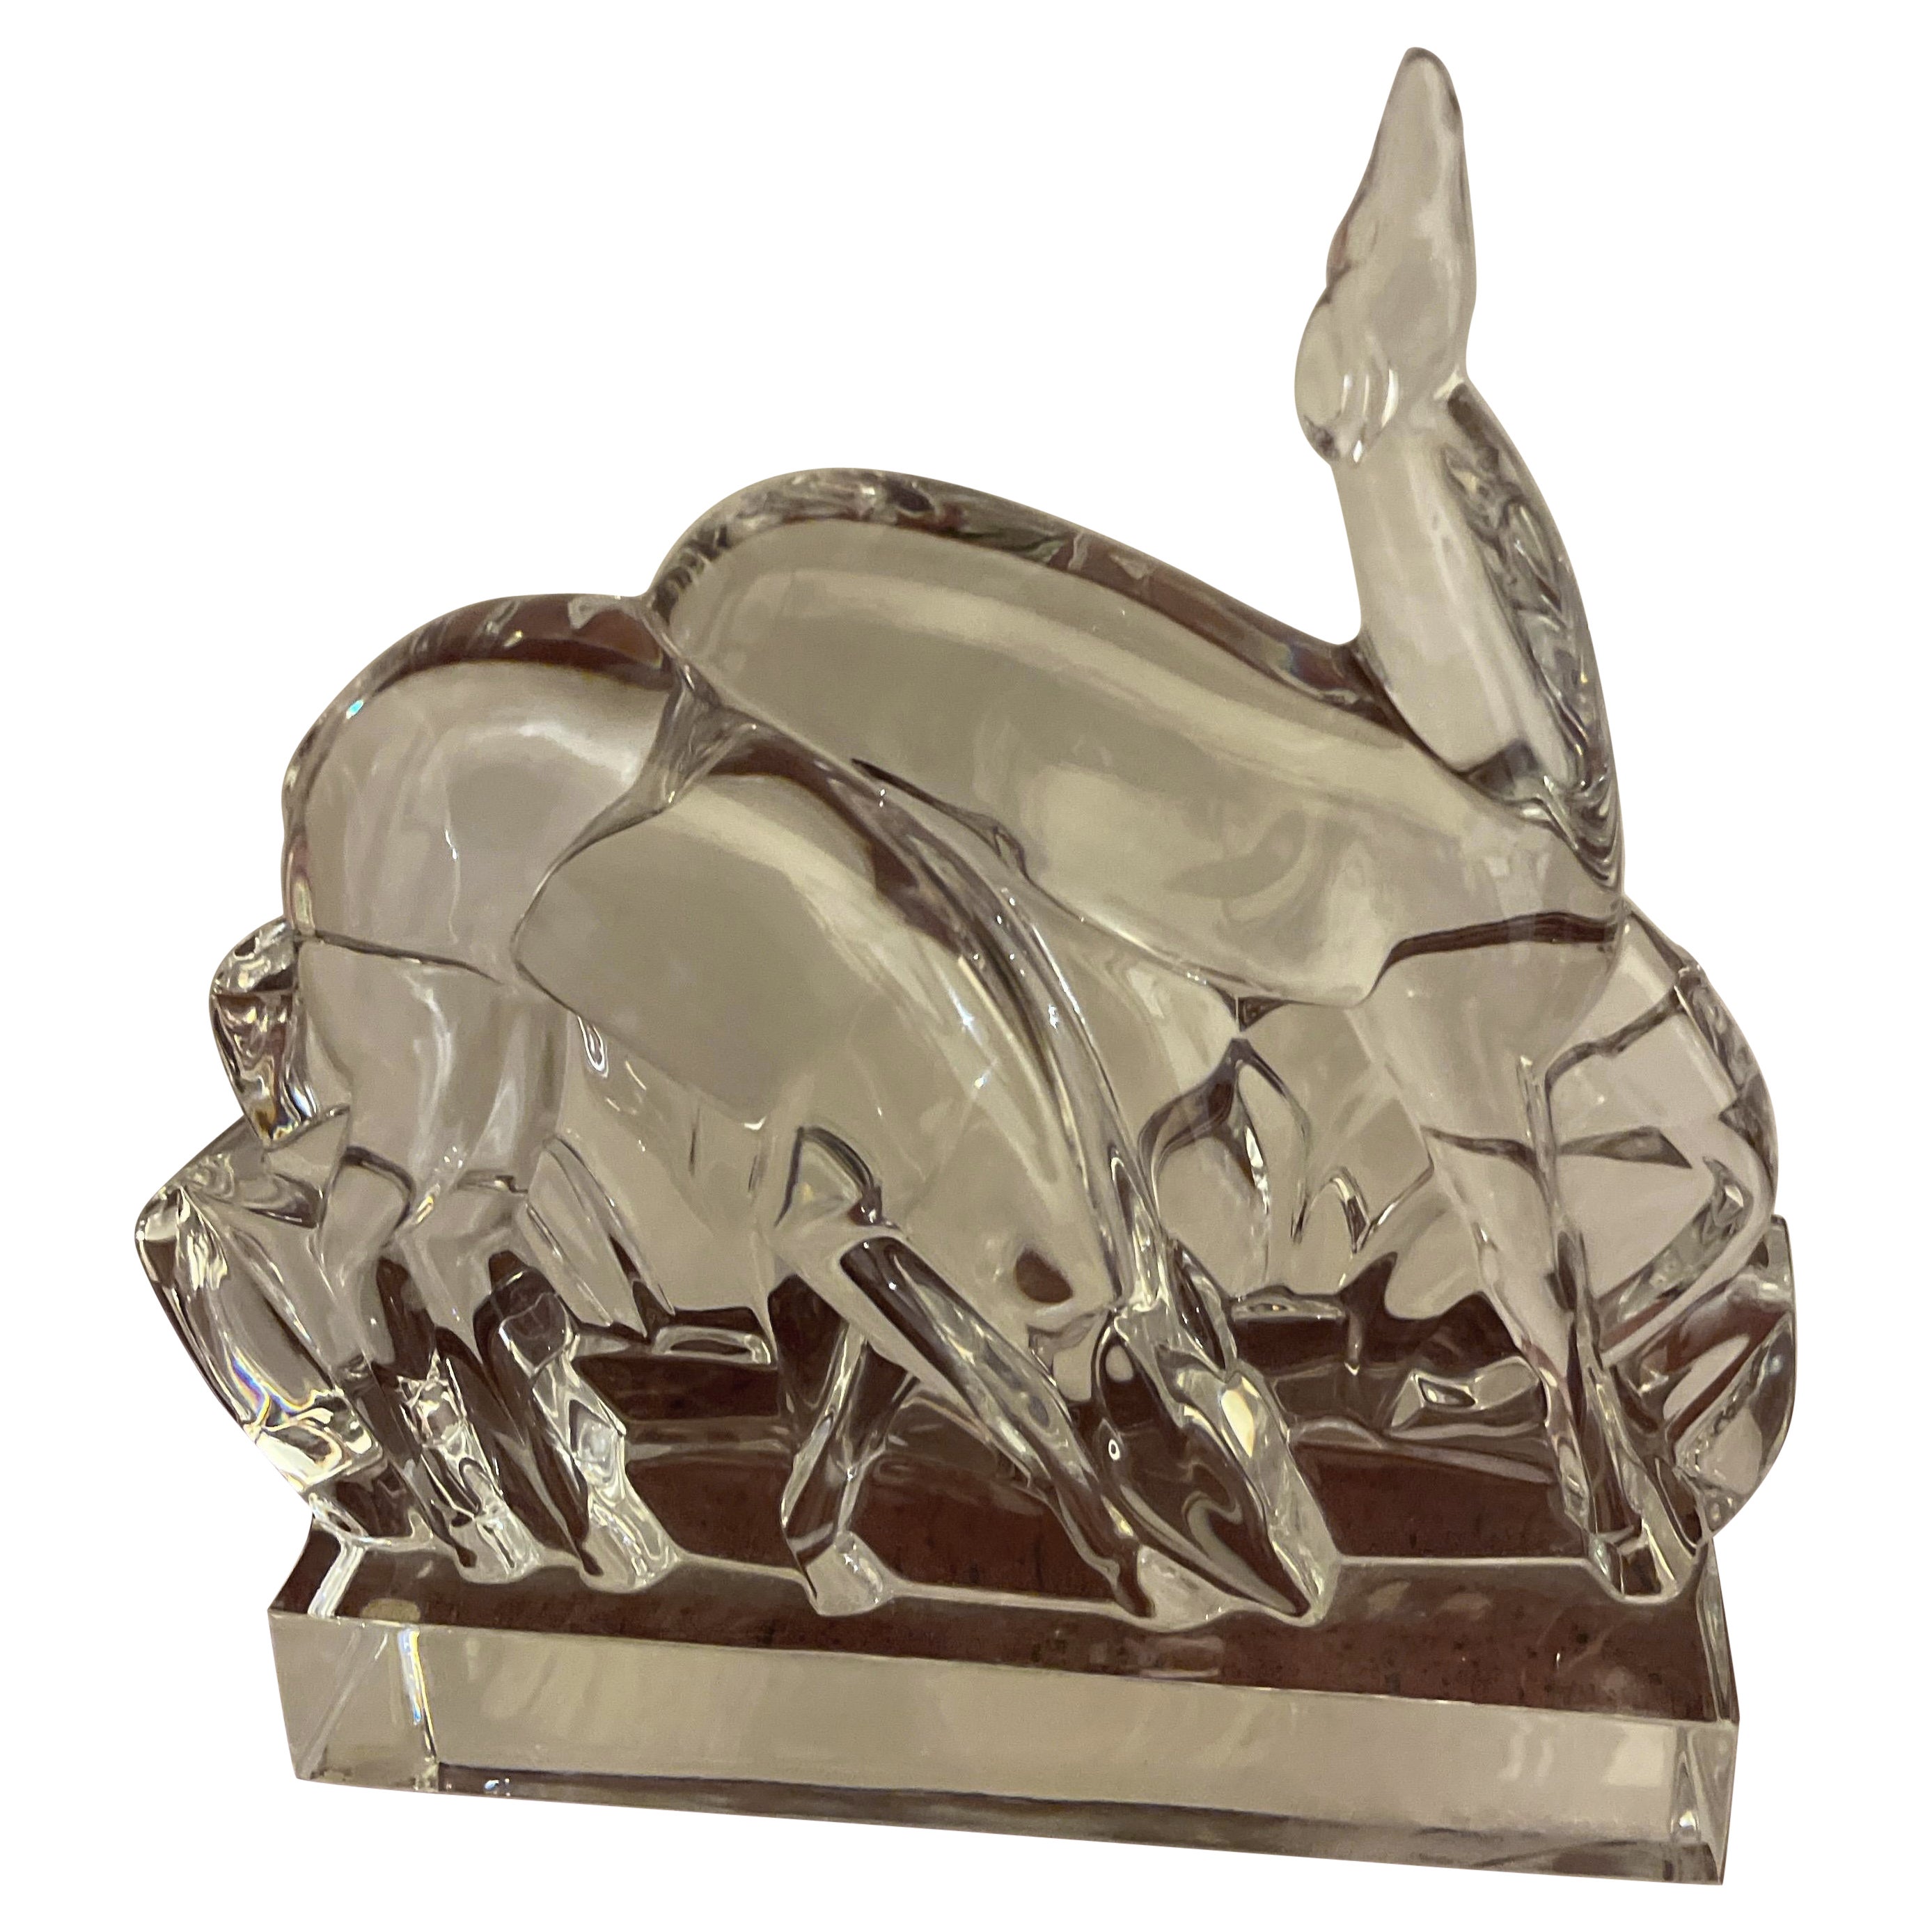 Baccarat Crystal Figurine of a Pair of Gazelles